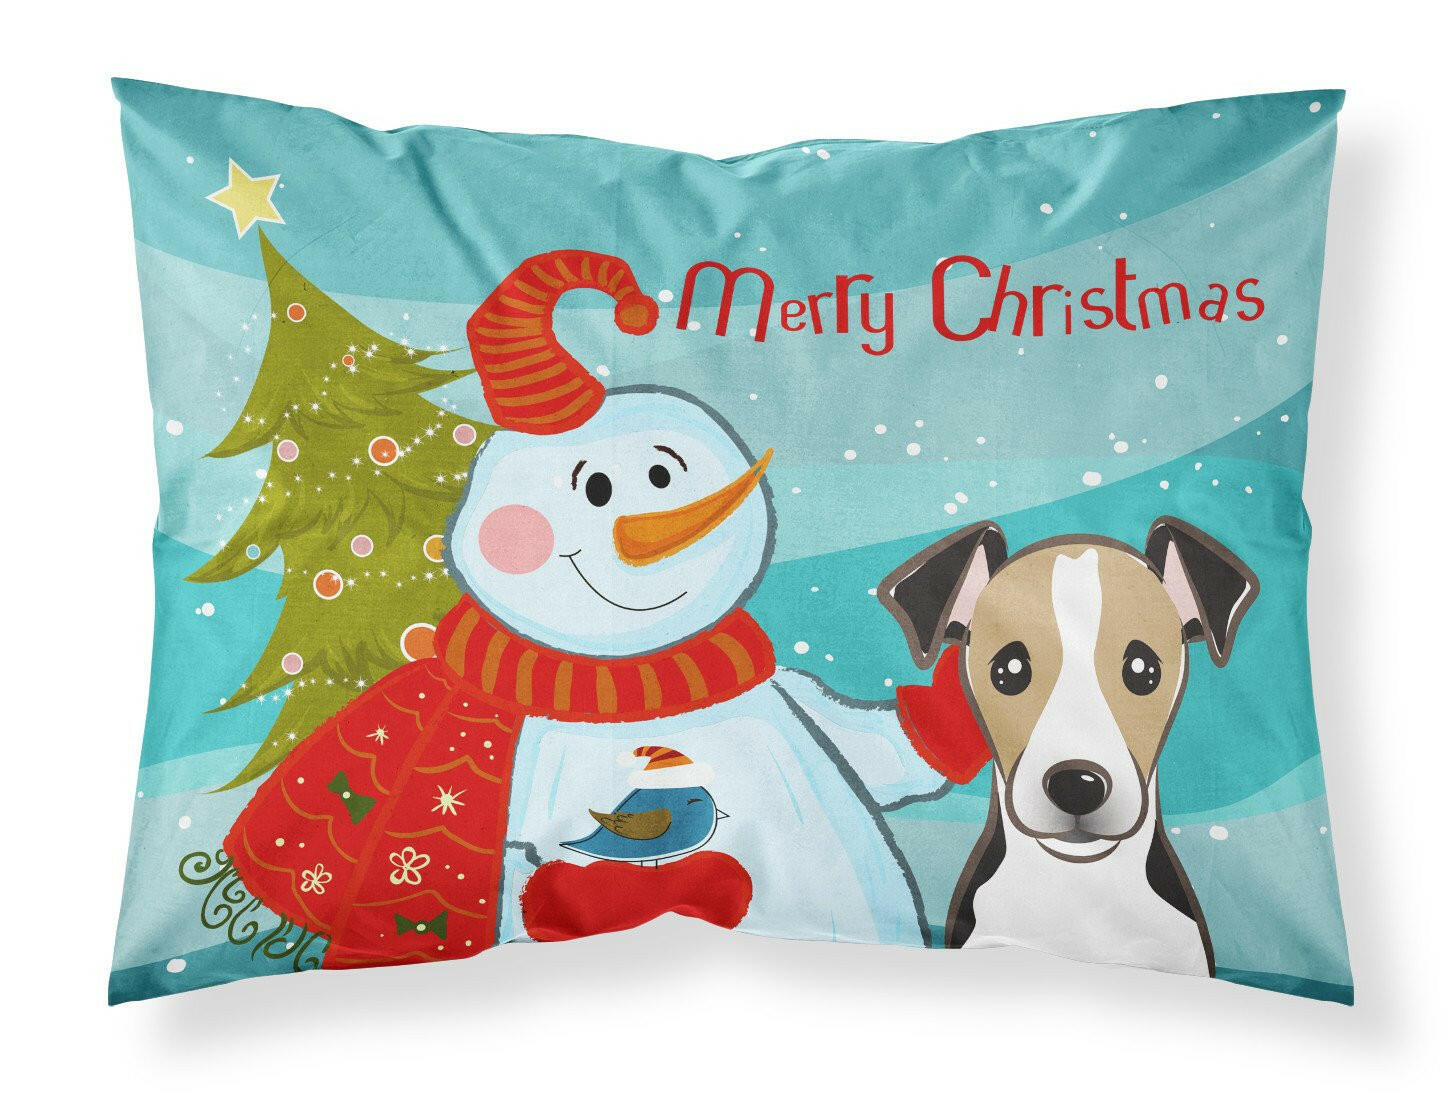 Snowman with Jack Russell Terrier Fabric Standard Pillowcase BB1881PILLOWCASE by Caroline's Treasures